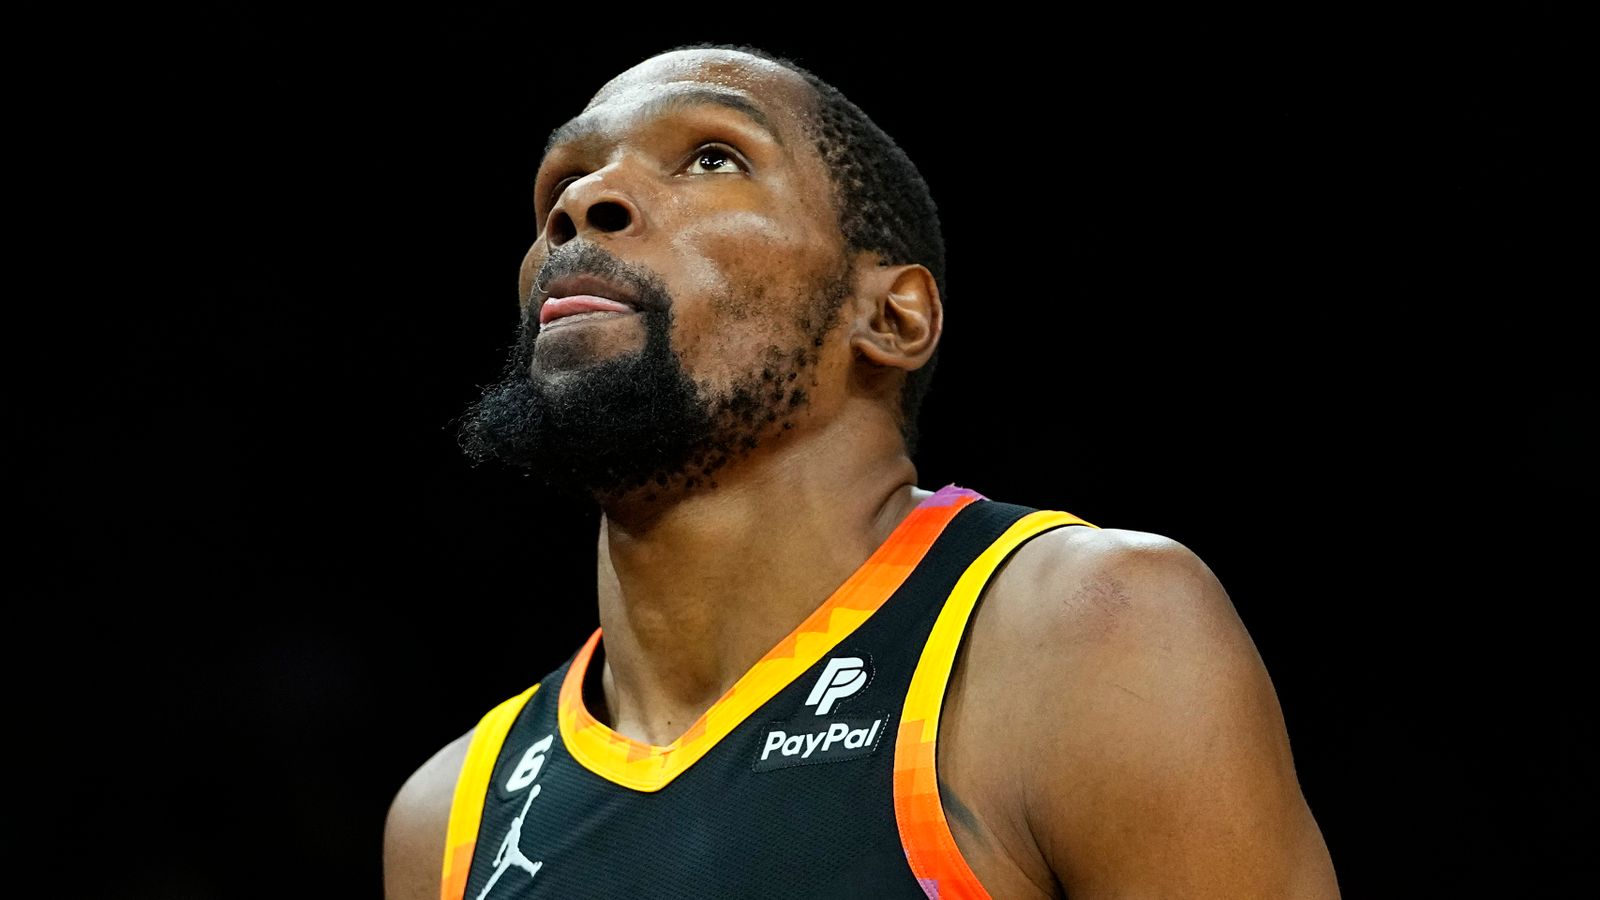 Kevin Durant 'embarrassed' by Phoenix Suns' playoff loss to Denver Nuggets

